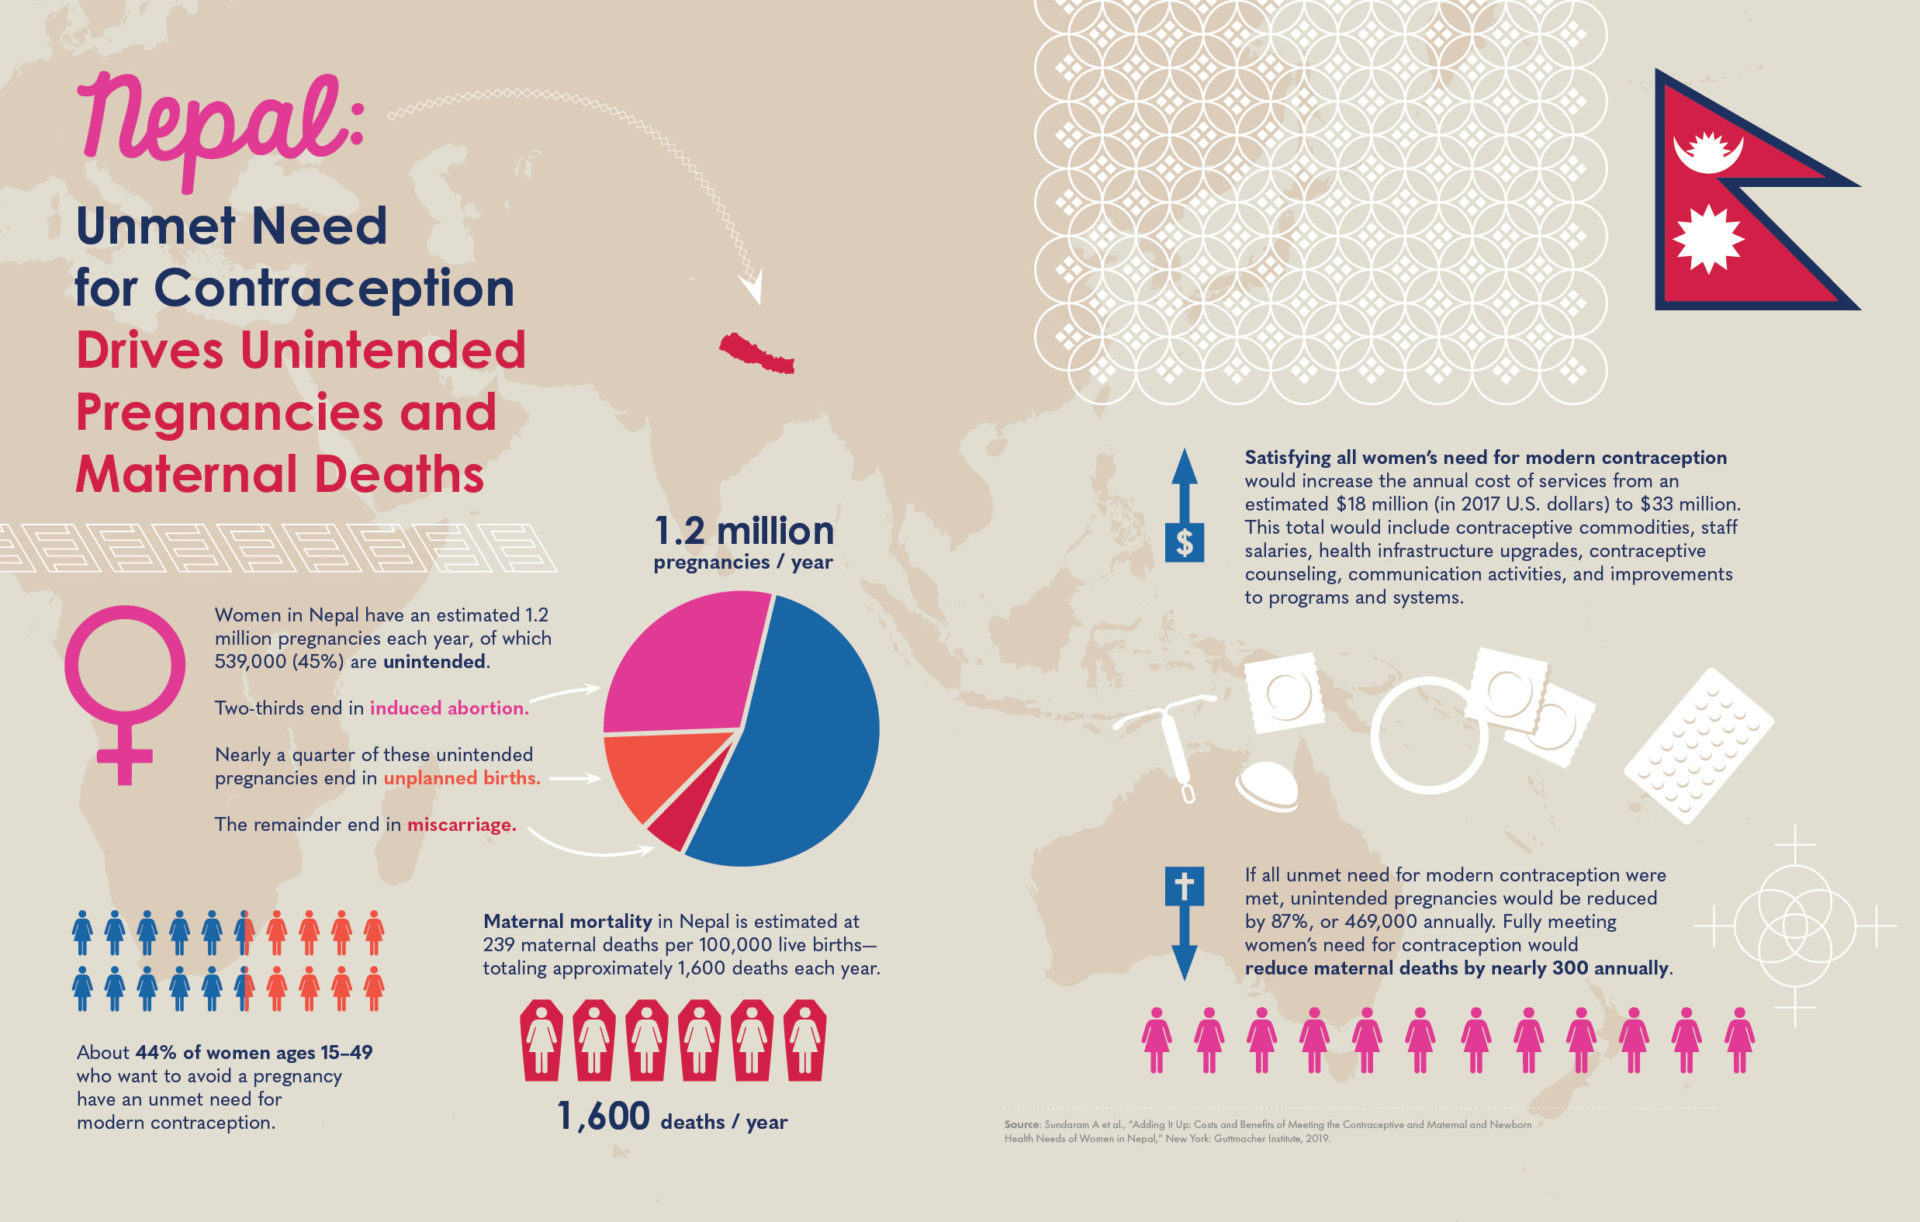 an infographic depicting the Unmet need for contraception in Nepal. The unmet need drives unintented pregnancies and maternal deaths. There are roughly 1.2 million pregnacies each year. Roughly 45% are unintended. Out of the unintended pregnancies, 2/3 end in induced abortions; nearly 1/4 end in unplanned births; and the remainder end in miscarriages.